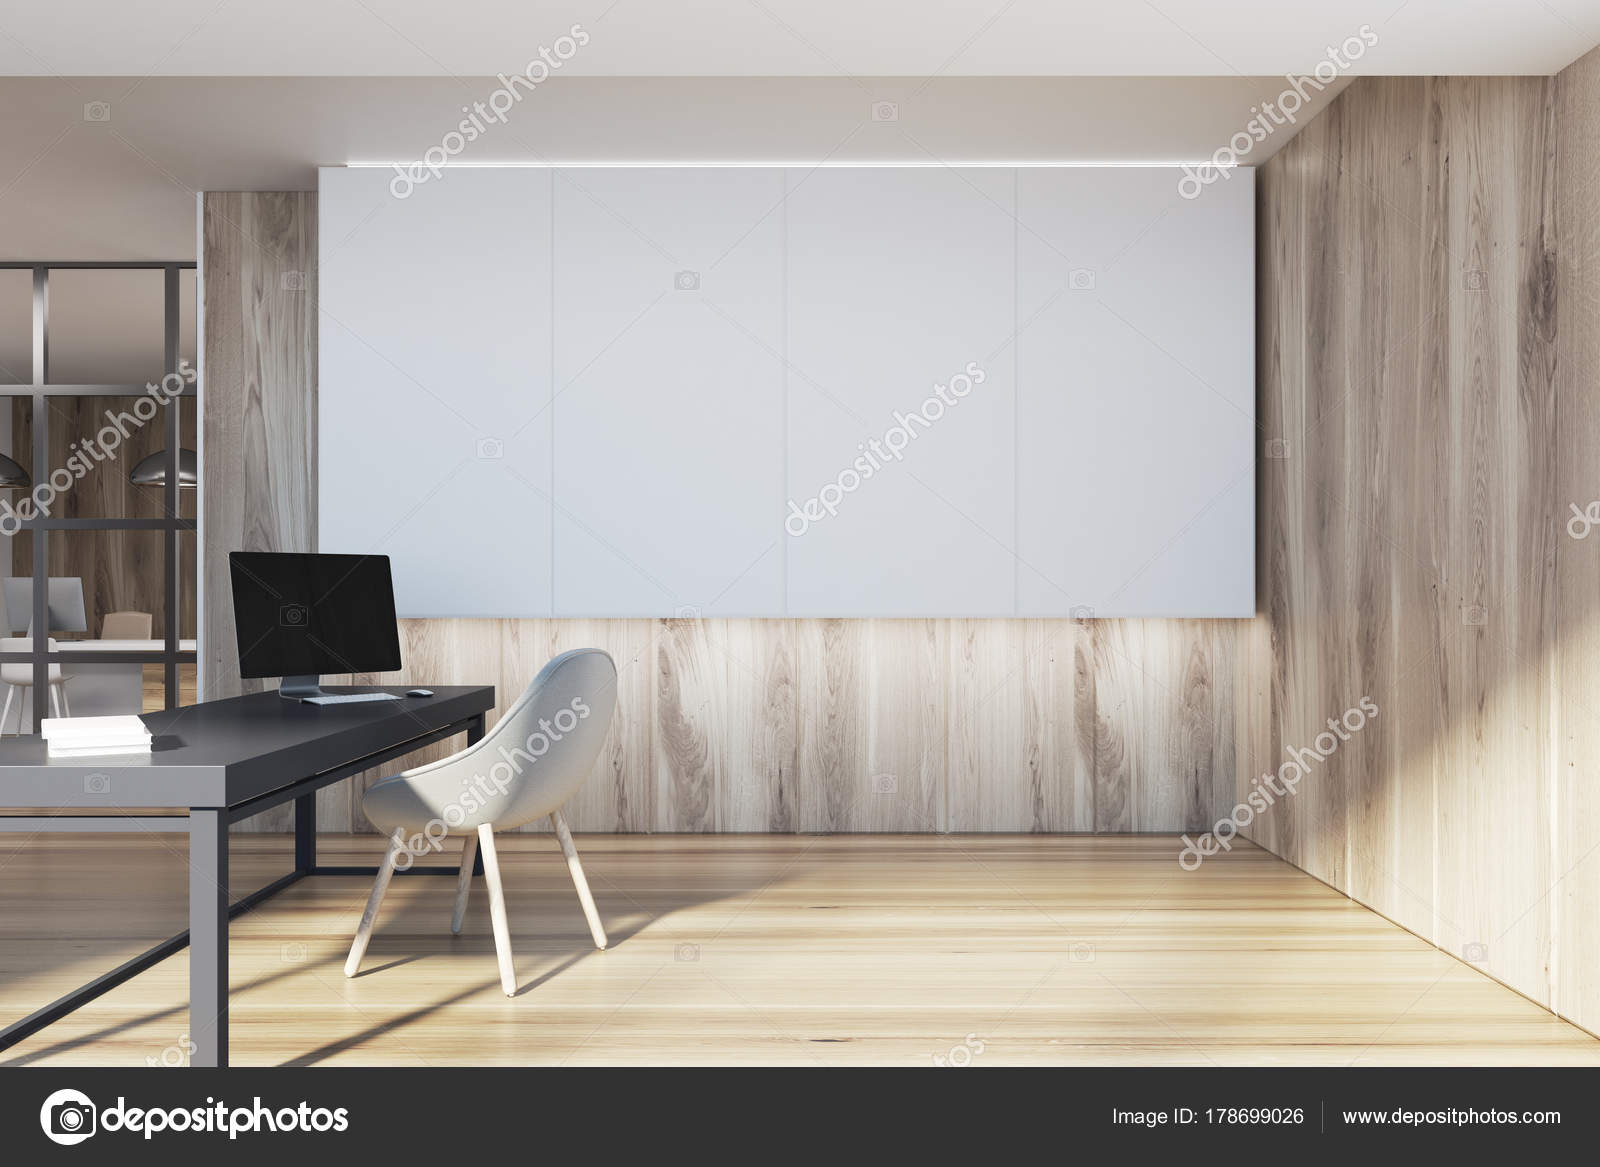 Wooden Ceo Office Interior White Stock Photo